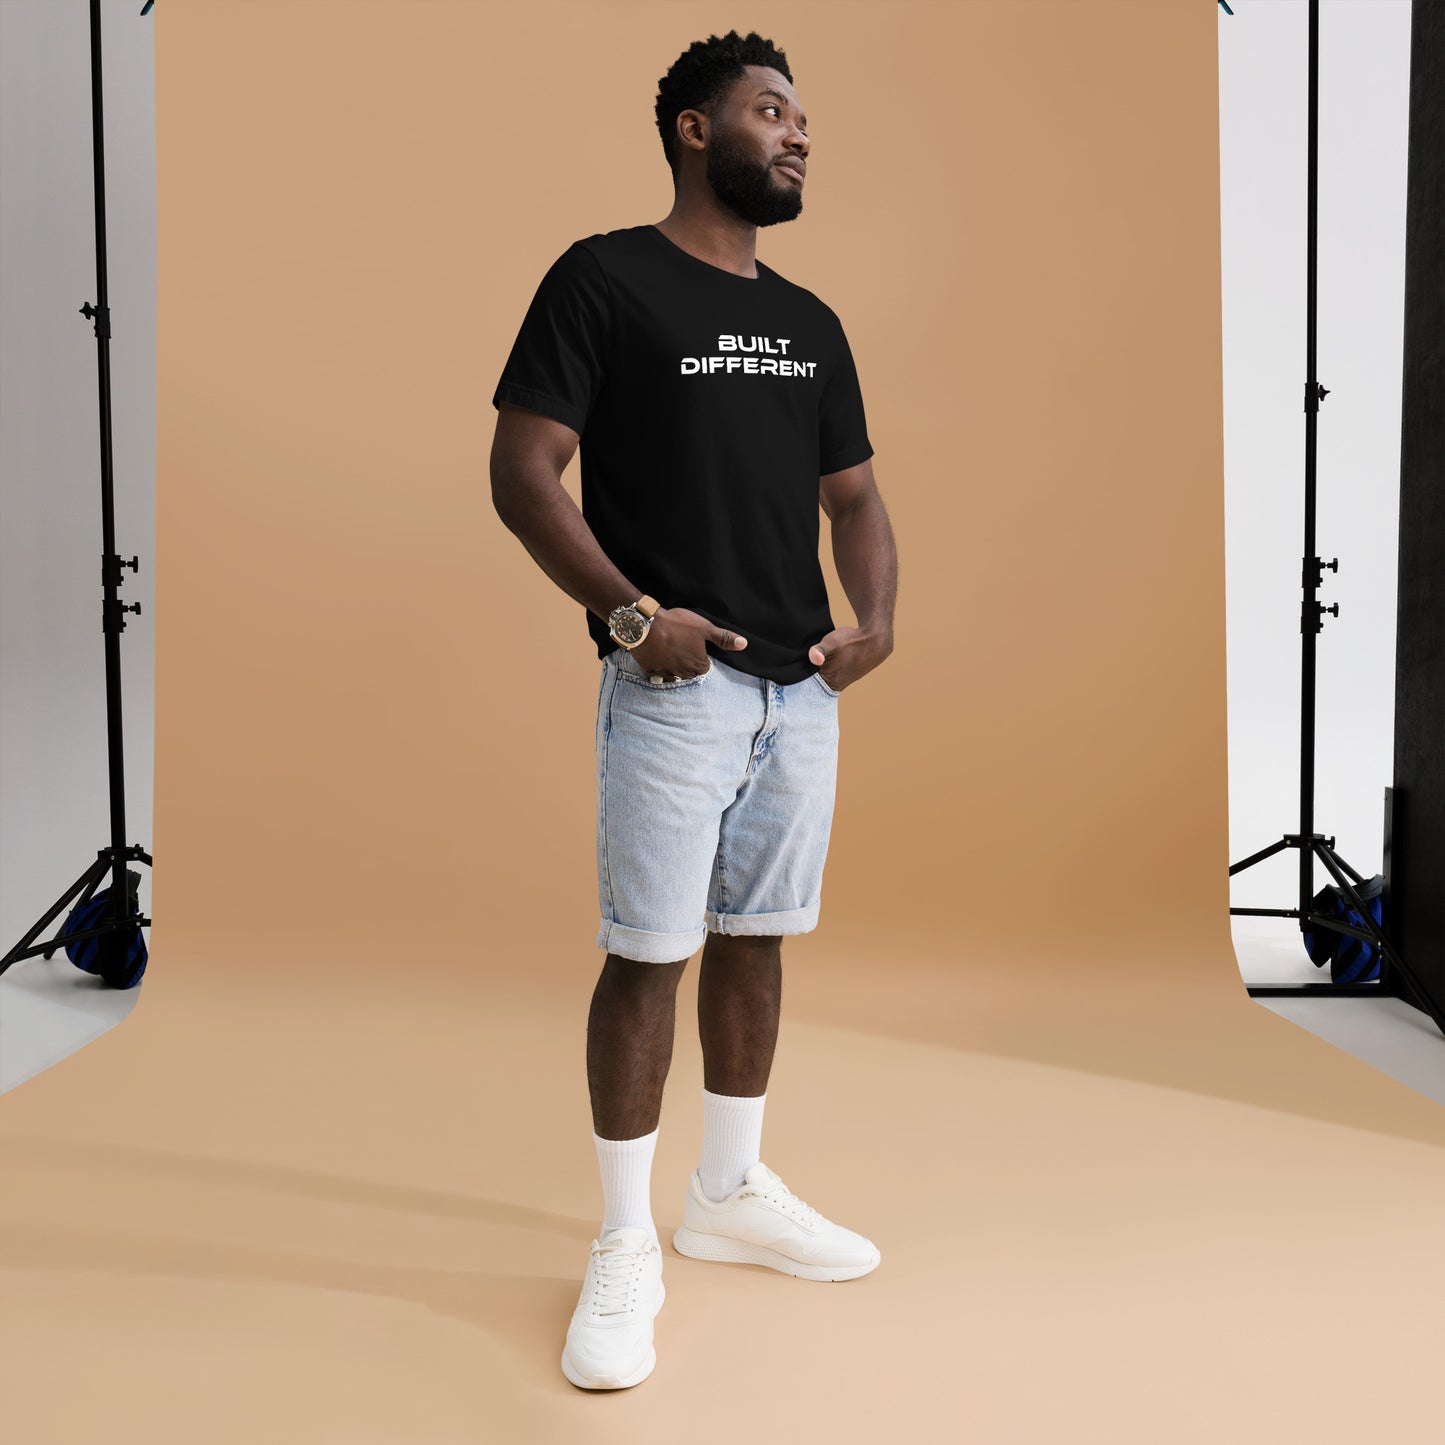 Built different Men's t-shirt-Soft and Trendy Everyday Tee